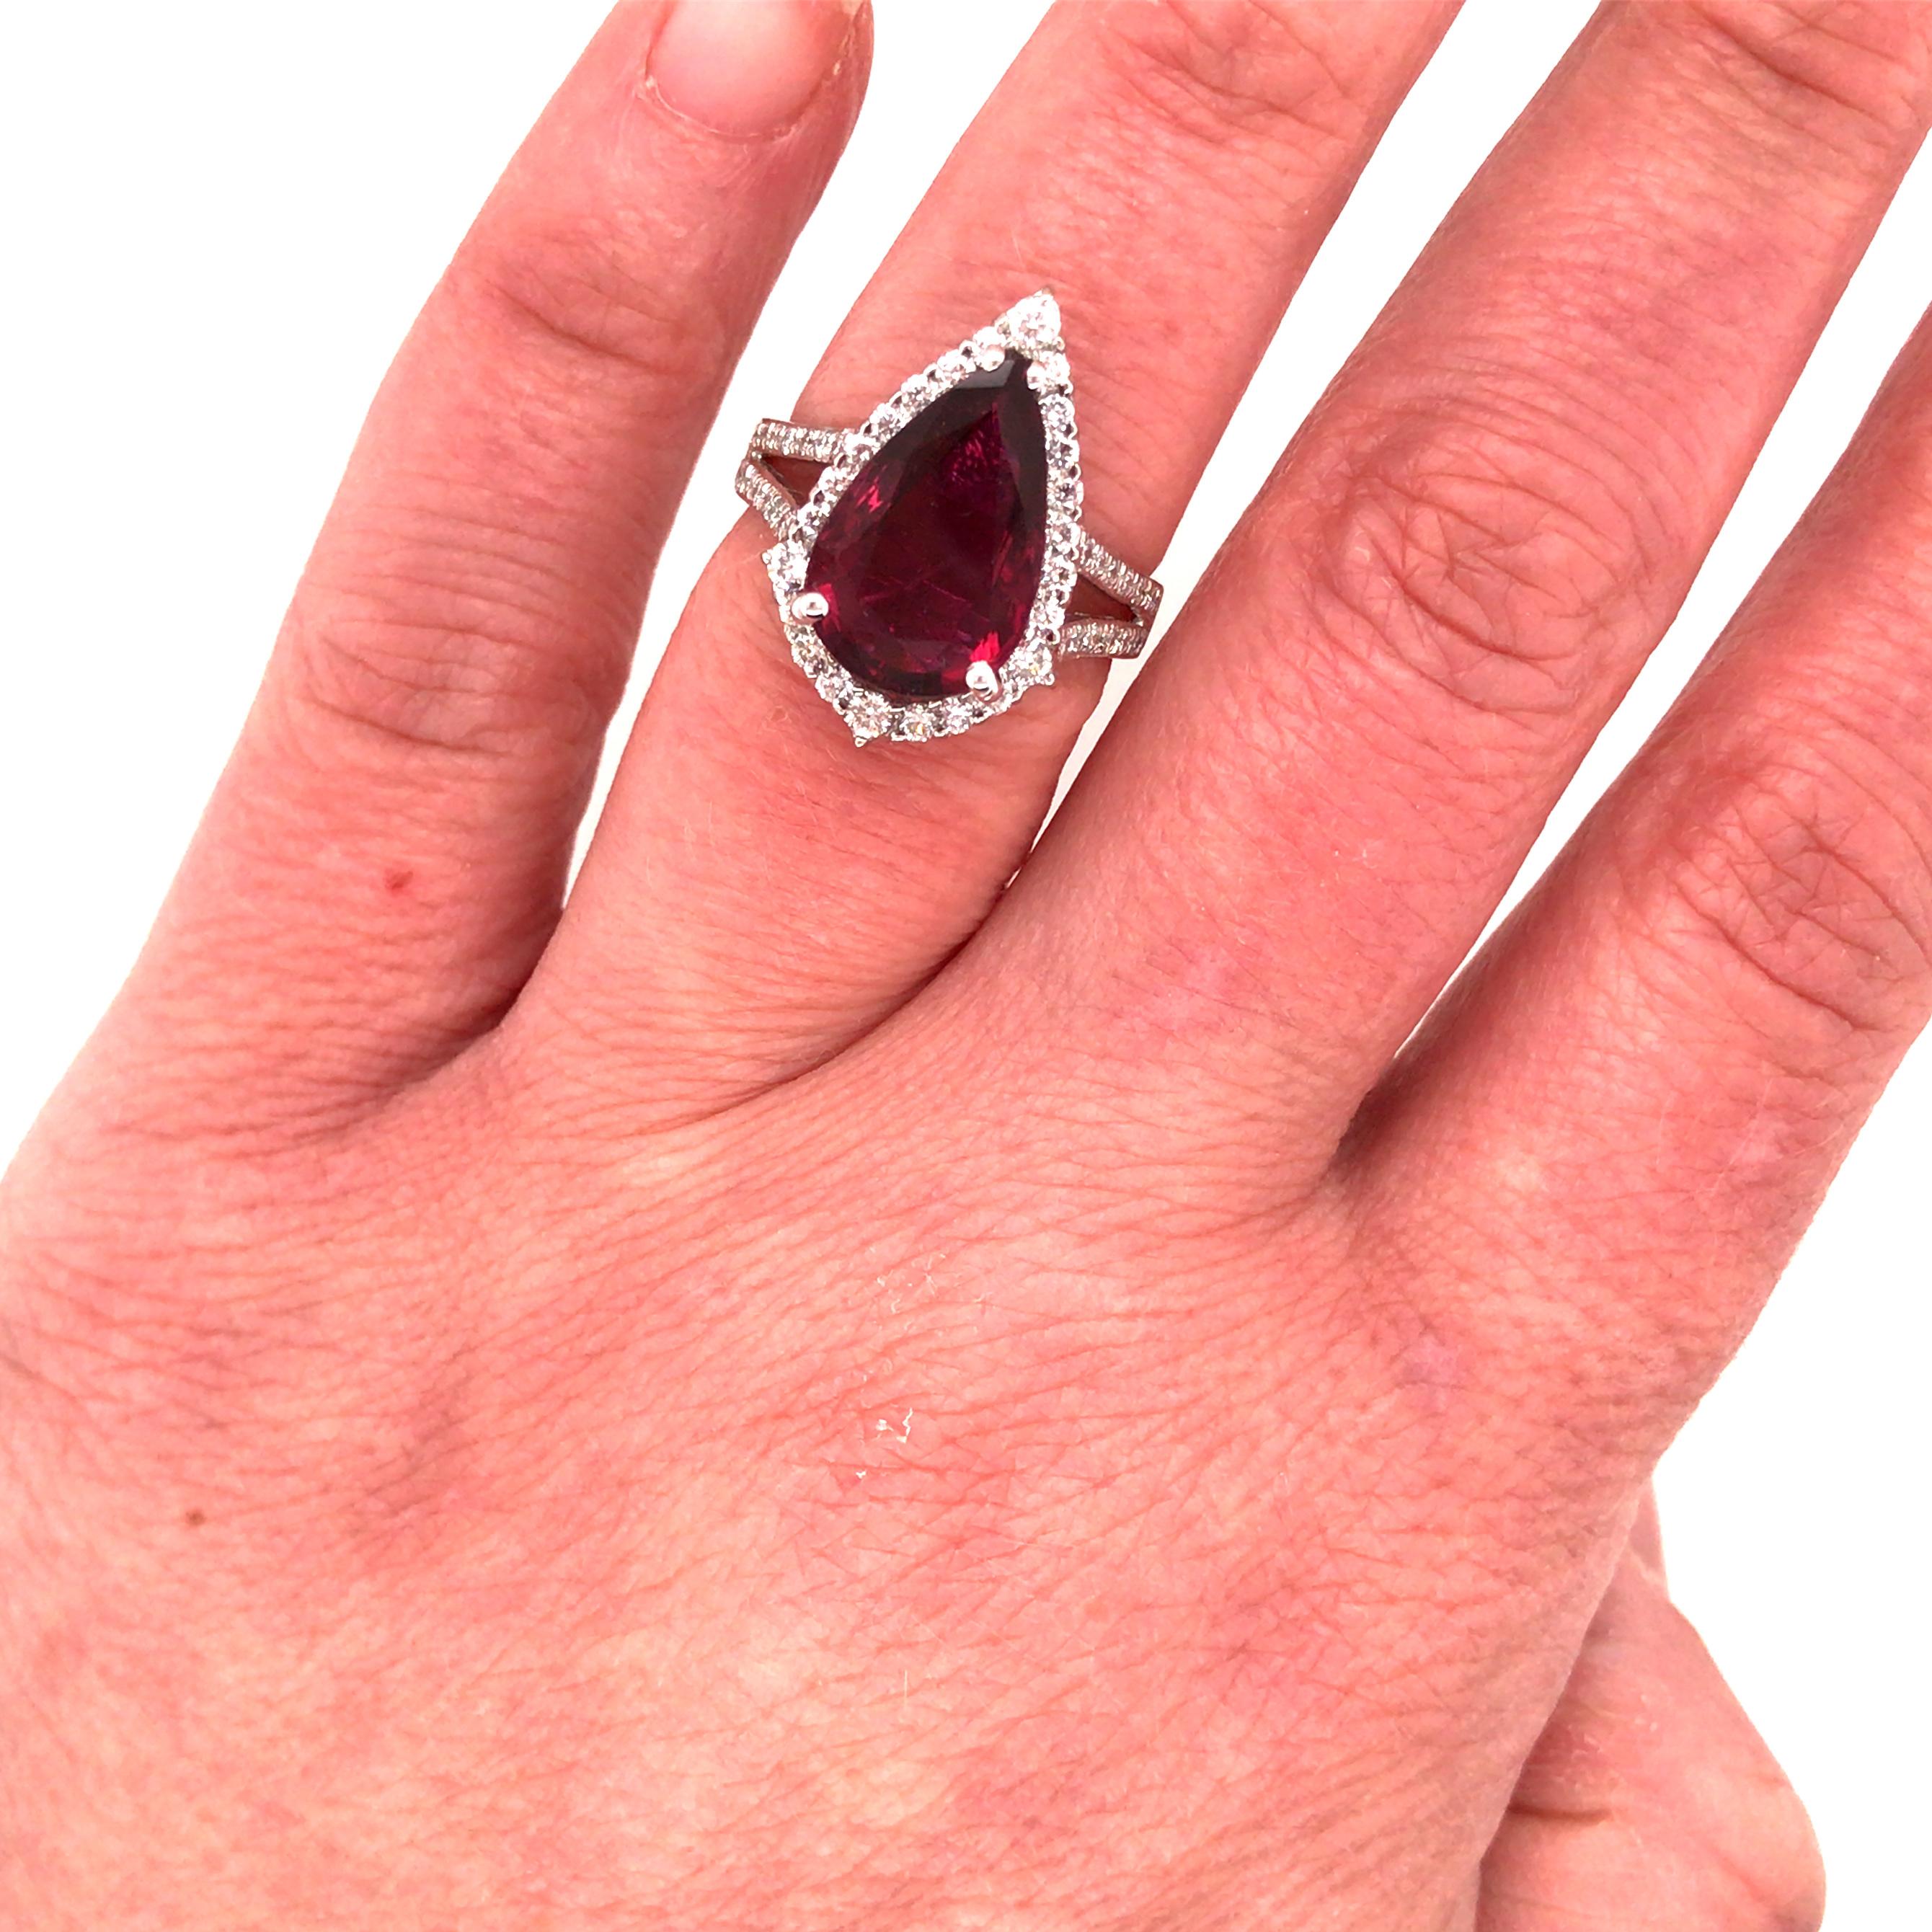 4.71 Carat Pear Shape Ruby and Diamond Halo Ring in 14K White Gold.  Round Brilliant Cut Diamonds weighing .80 carat total weight, G-H in color and VS in clarity are expertly set in the split shank and halo surrounding the Ruby Center.  The Ring